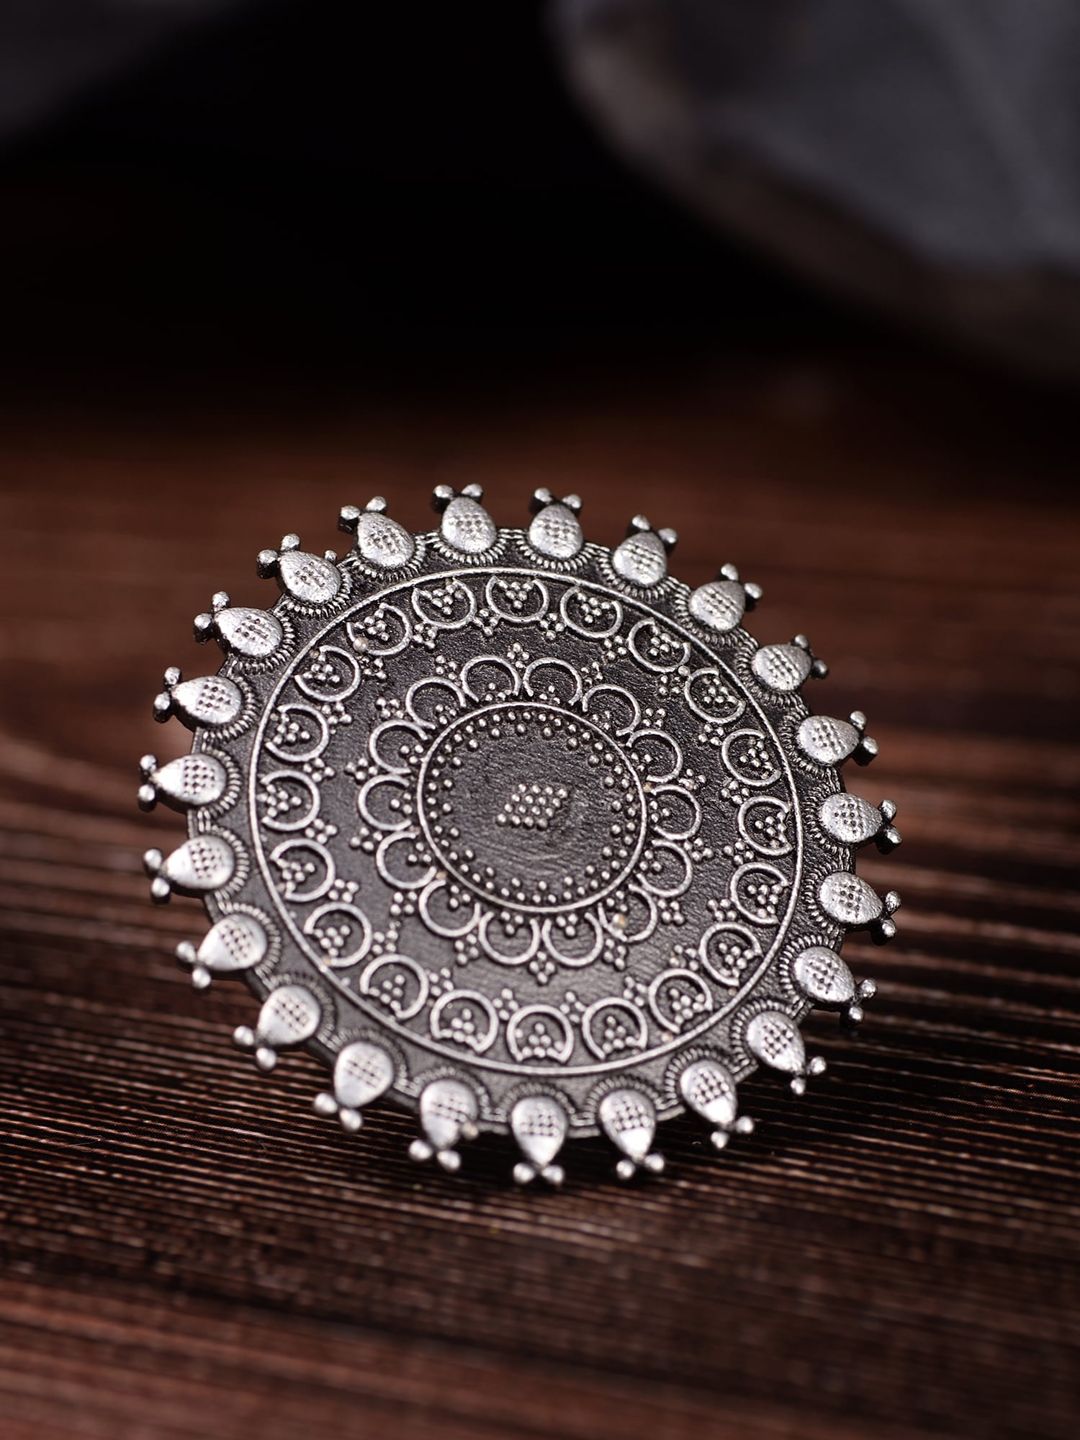 Saraf RS Jewellery Oxidised Silver-Toned Circular Tribal Adjustable Finger Ring Price in India